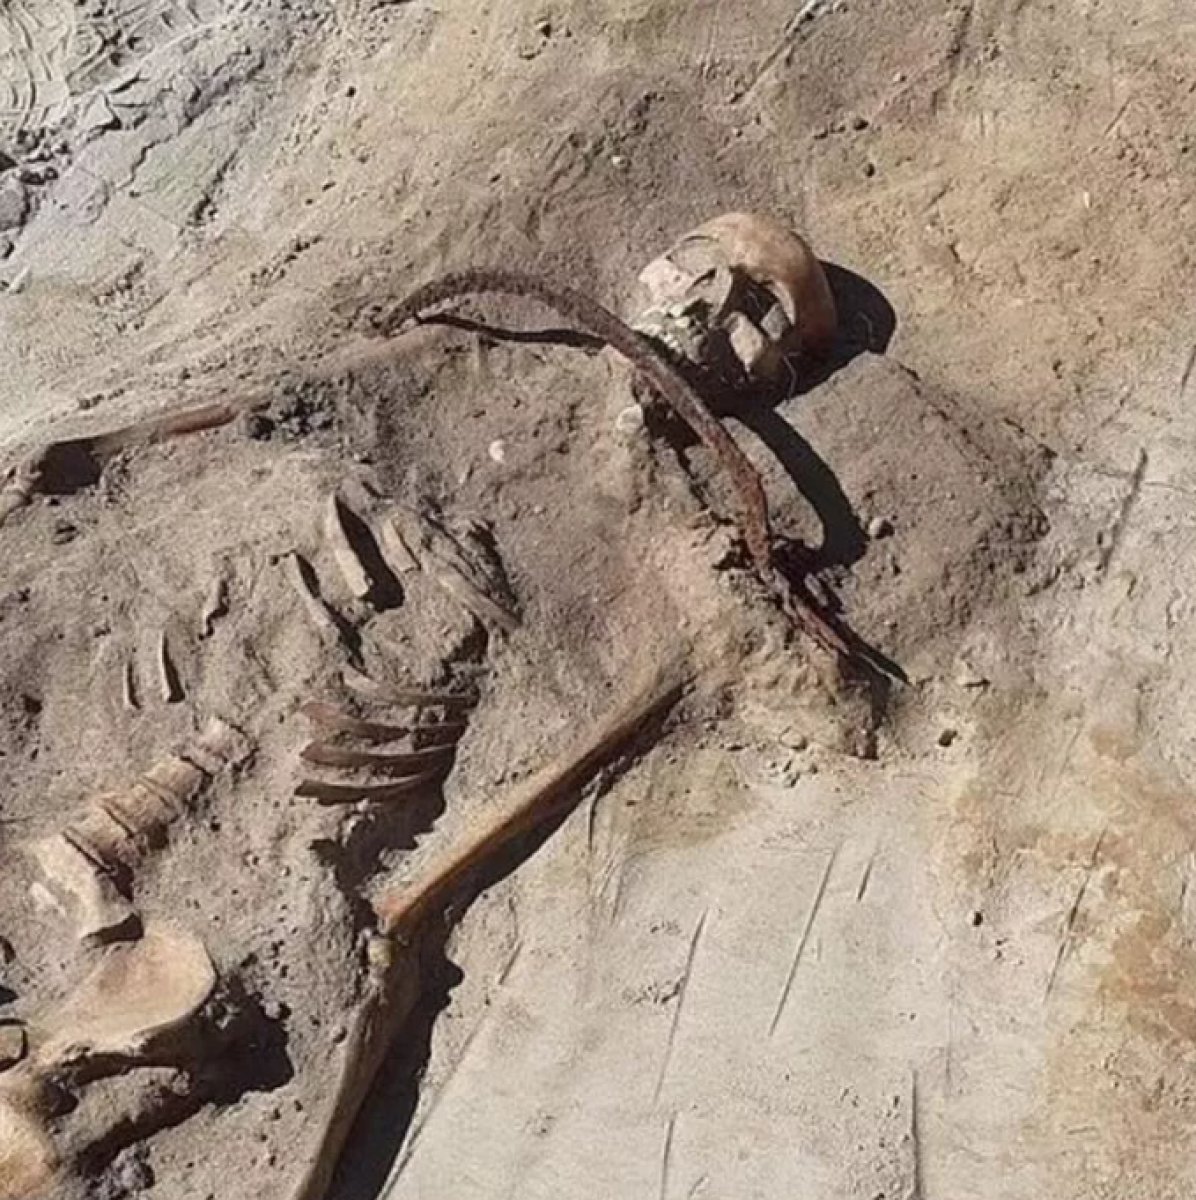 Skeleton thought to belong to 'female vampire' found in Poland #1